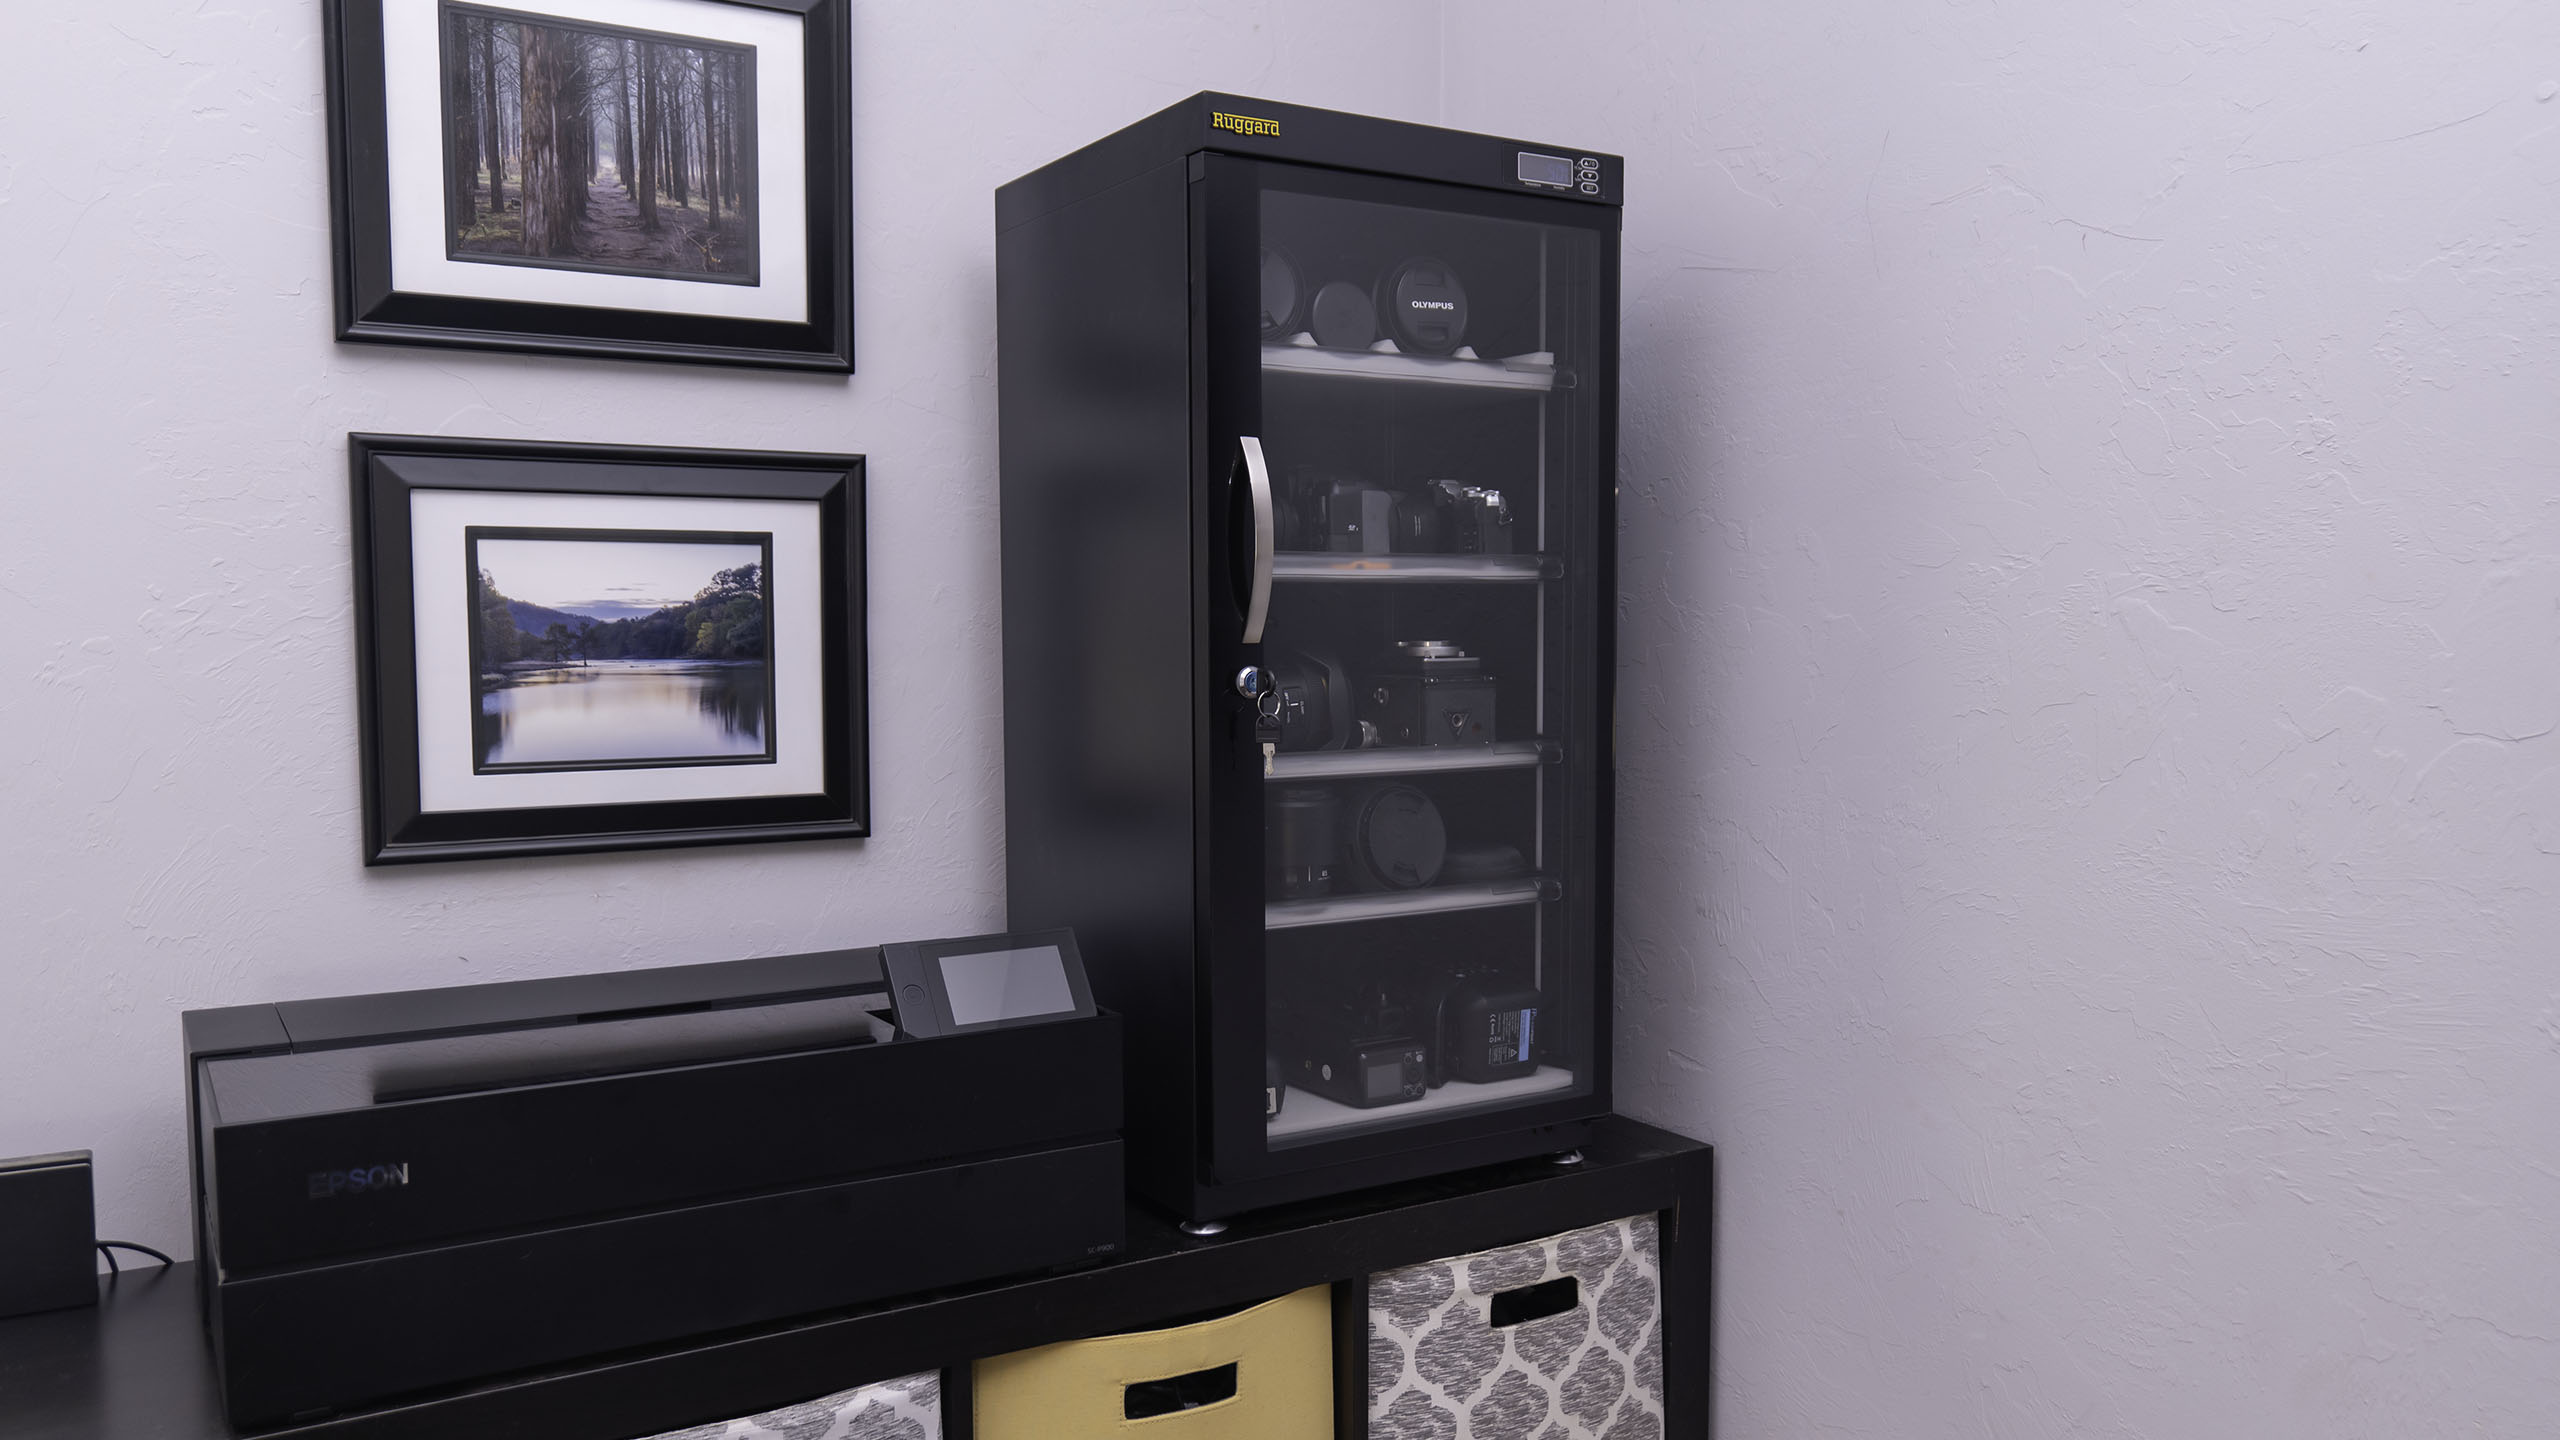 Deal alert: Keep your gear safe and save up to $120 on dry cabinets!